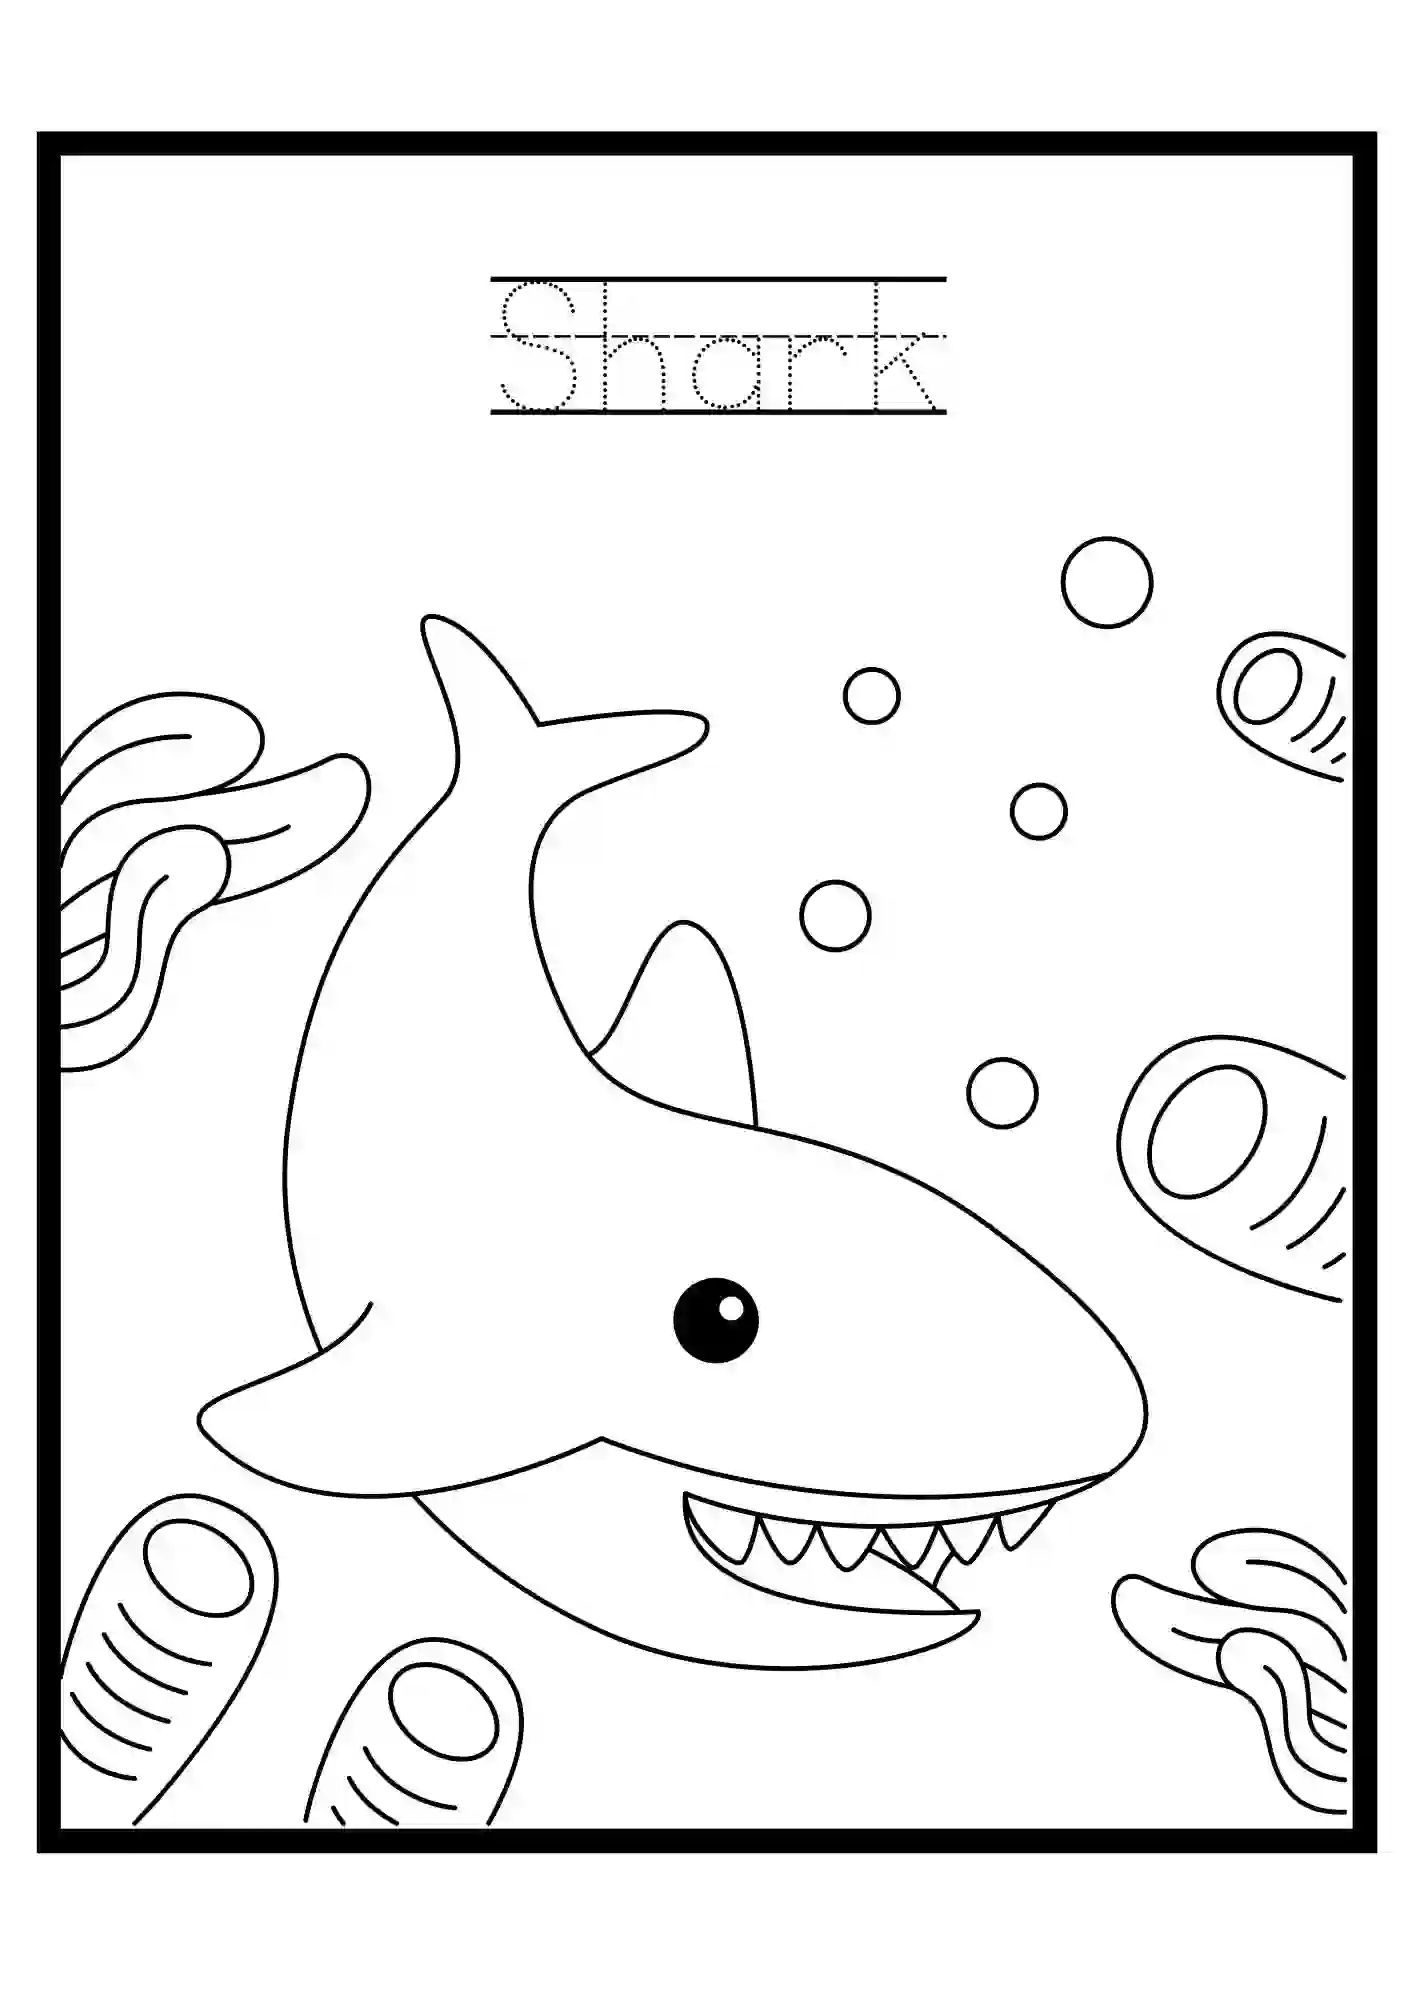  Under the Water Colouring Worksheets Shark